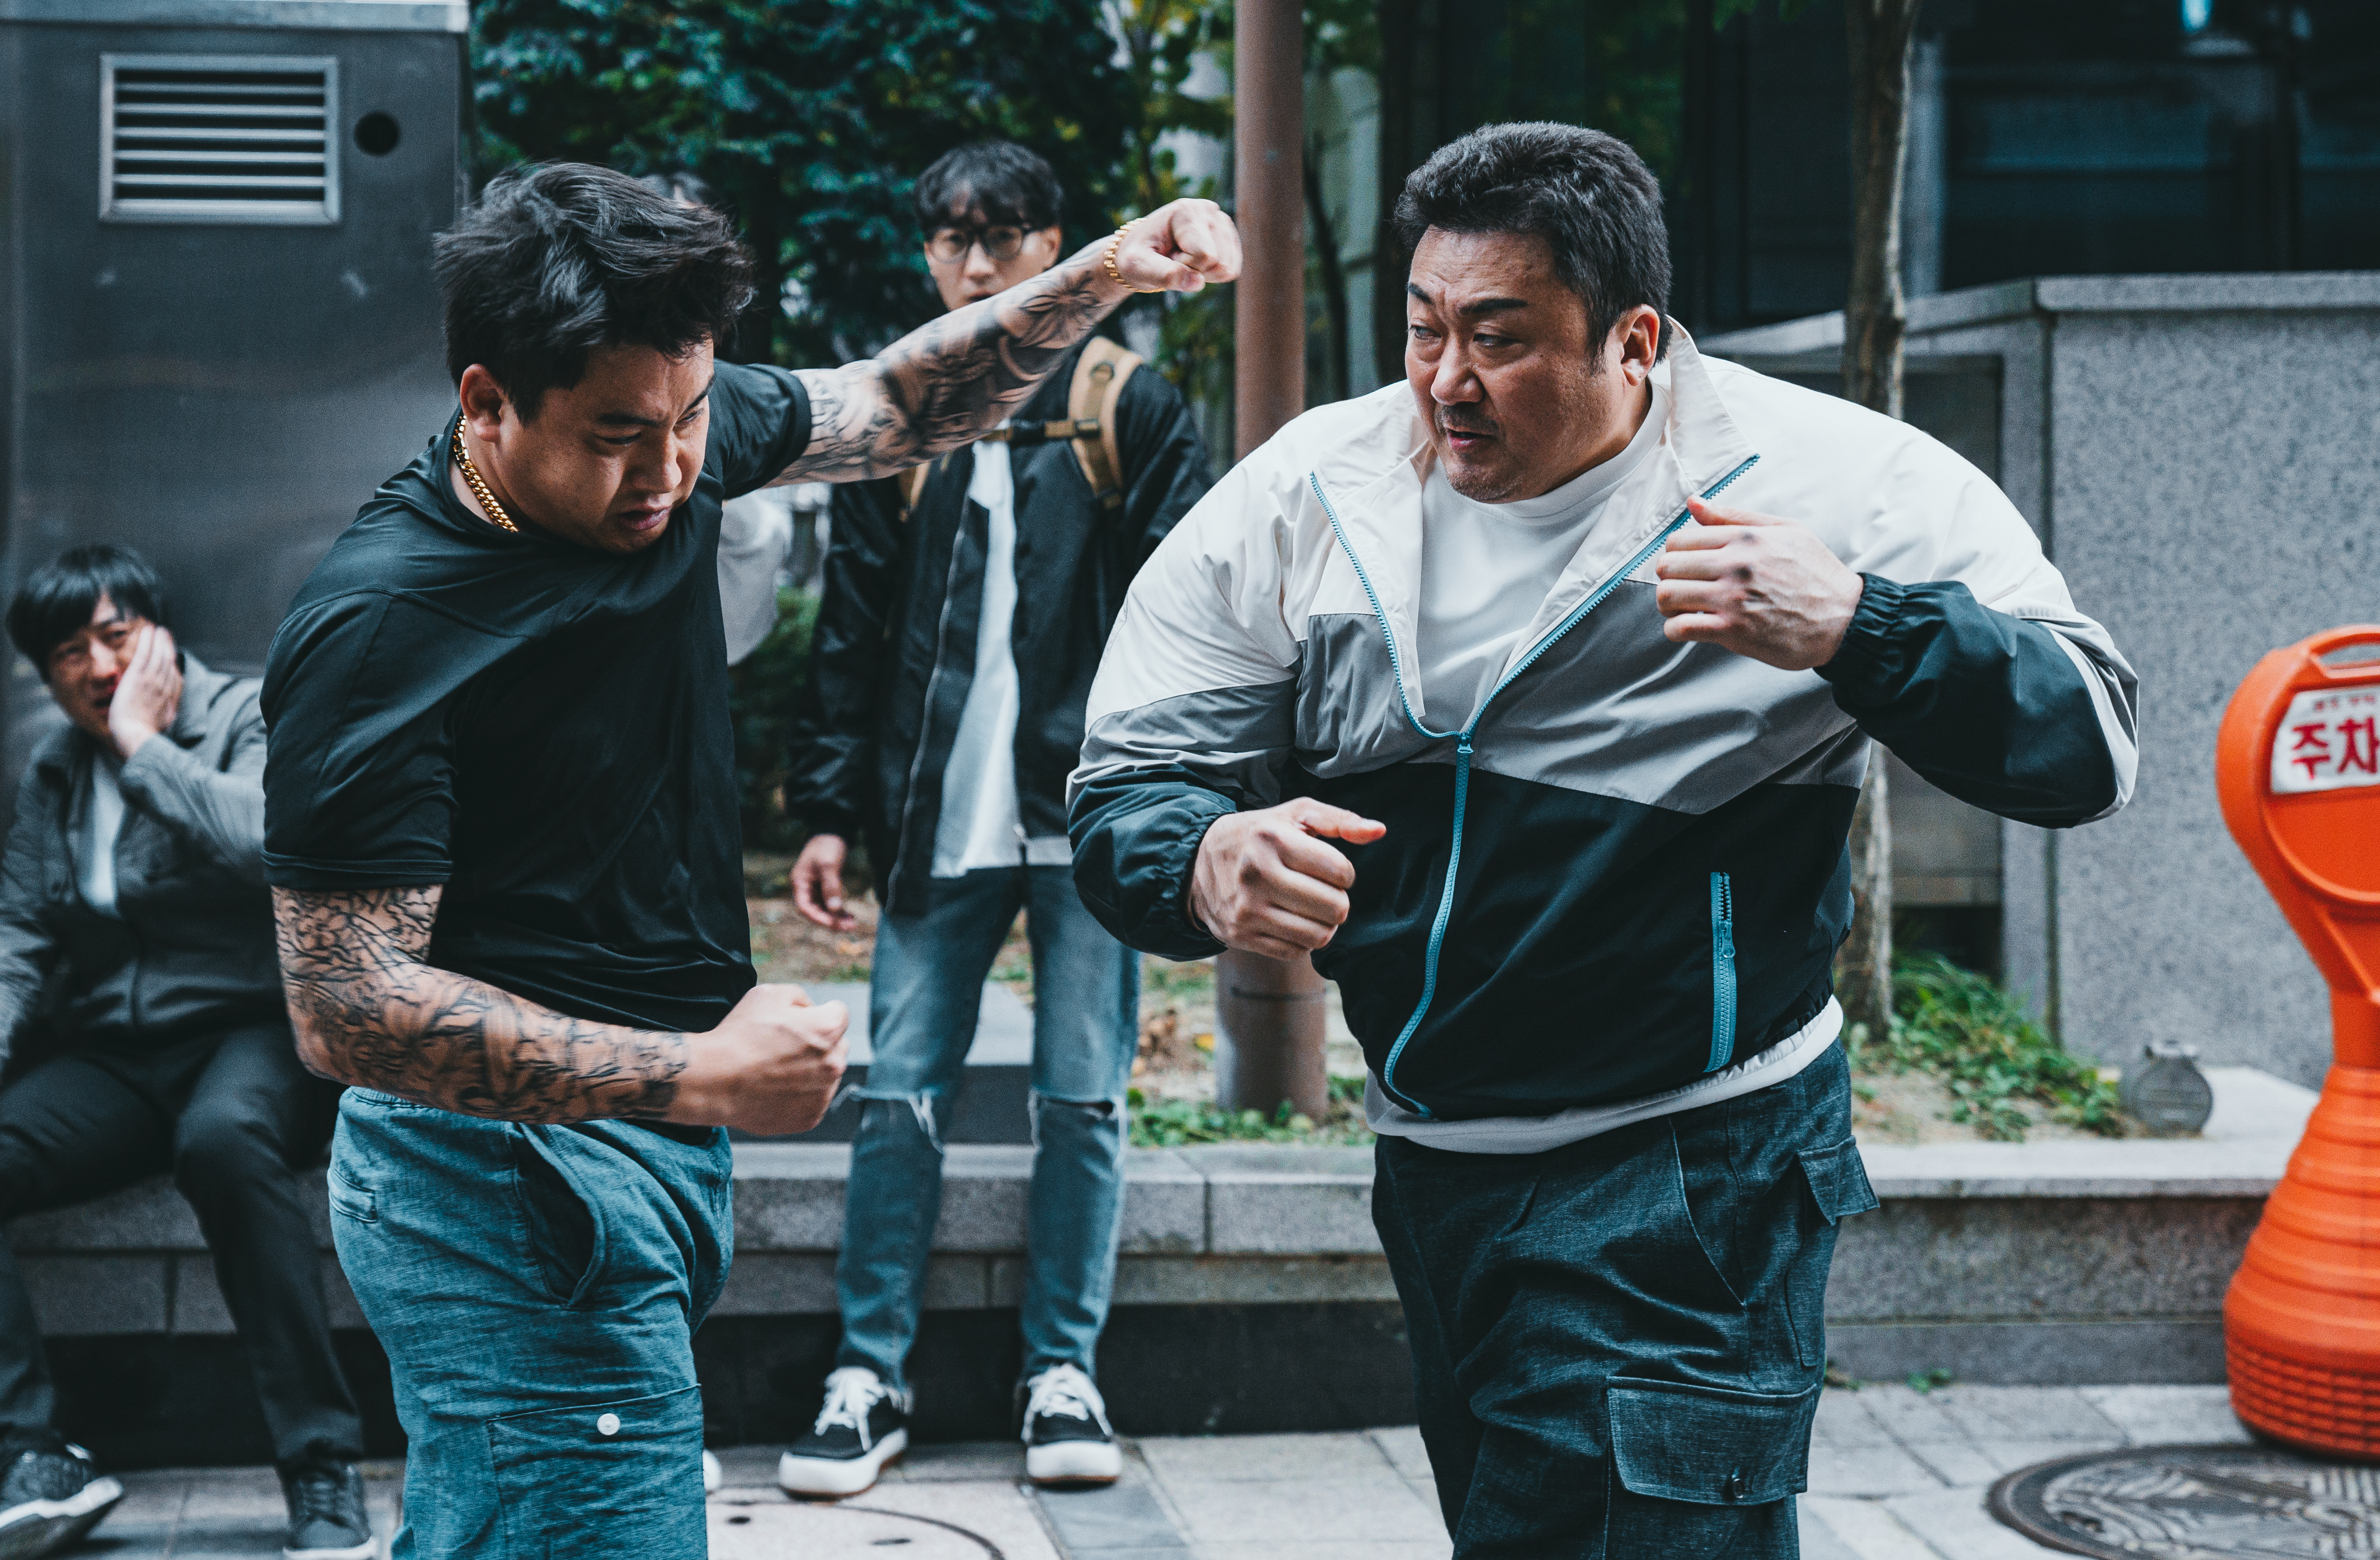 Ma Dong-seok, wearing a track suit, punches a young person in the stomach in The Roundup: No Way Out. The person being punched reacts as if they’ve been hit by a truck.